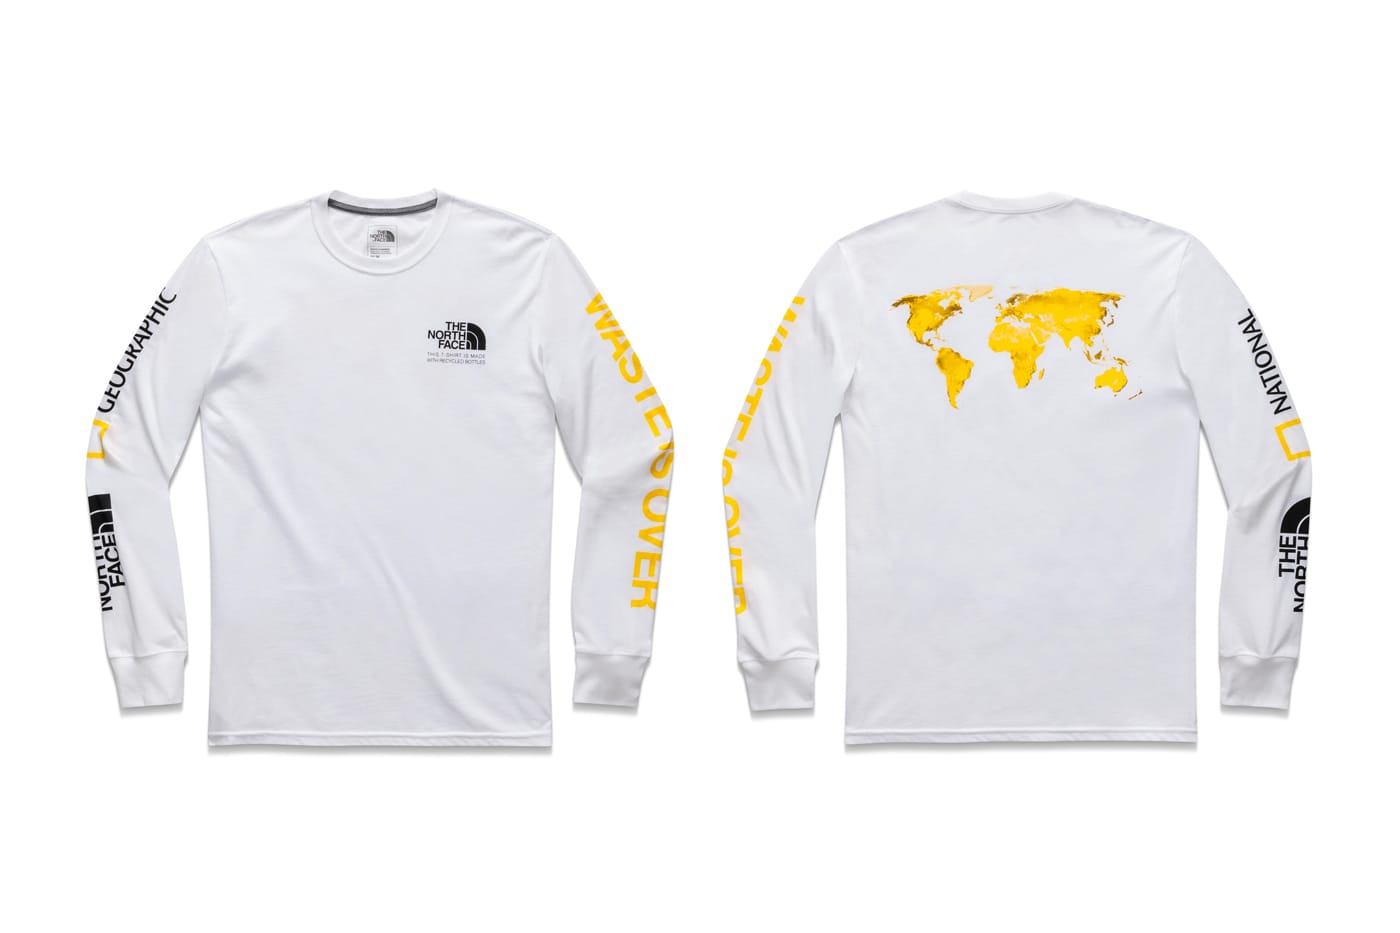 north face x national geographic hoodie